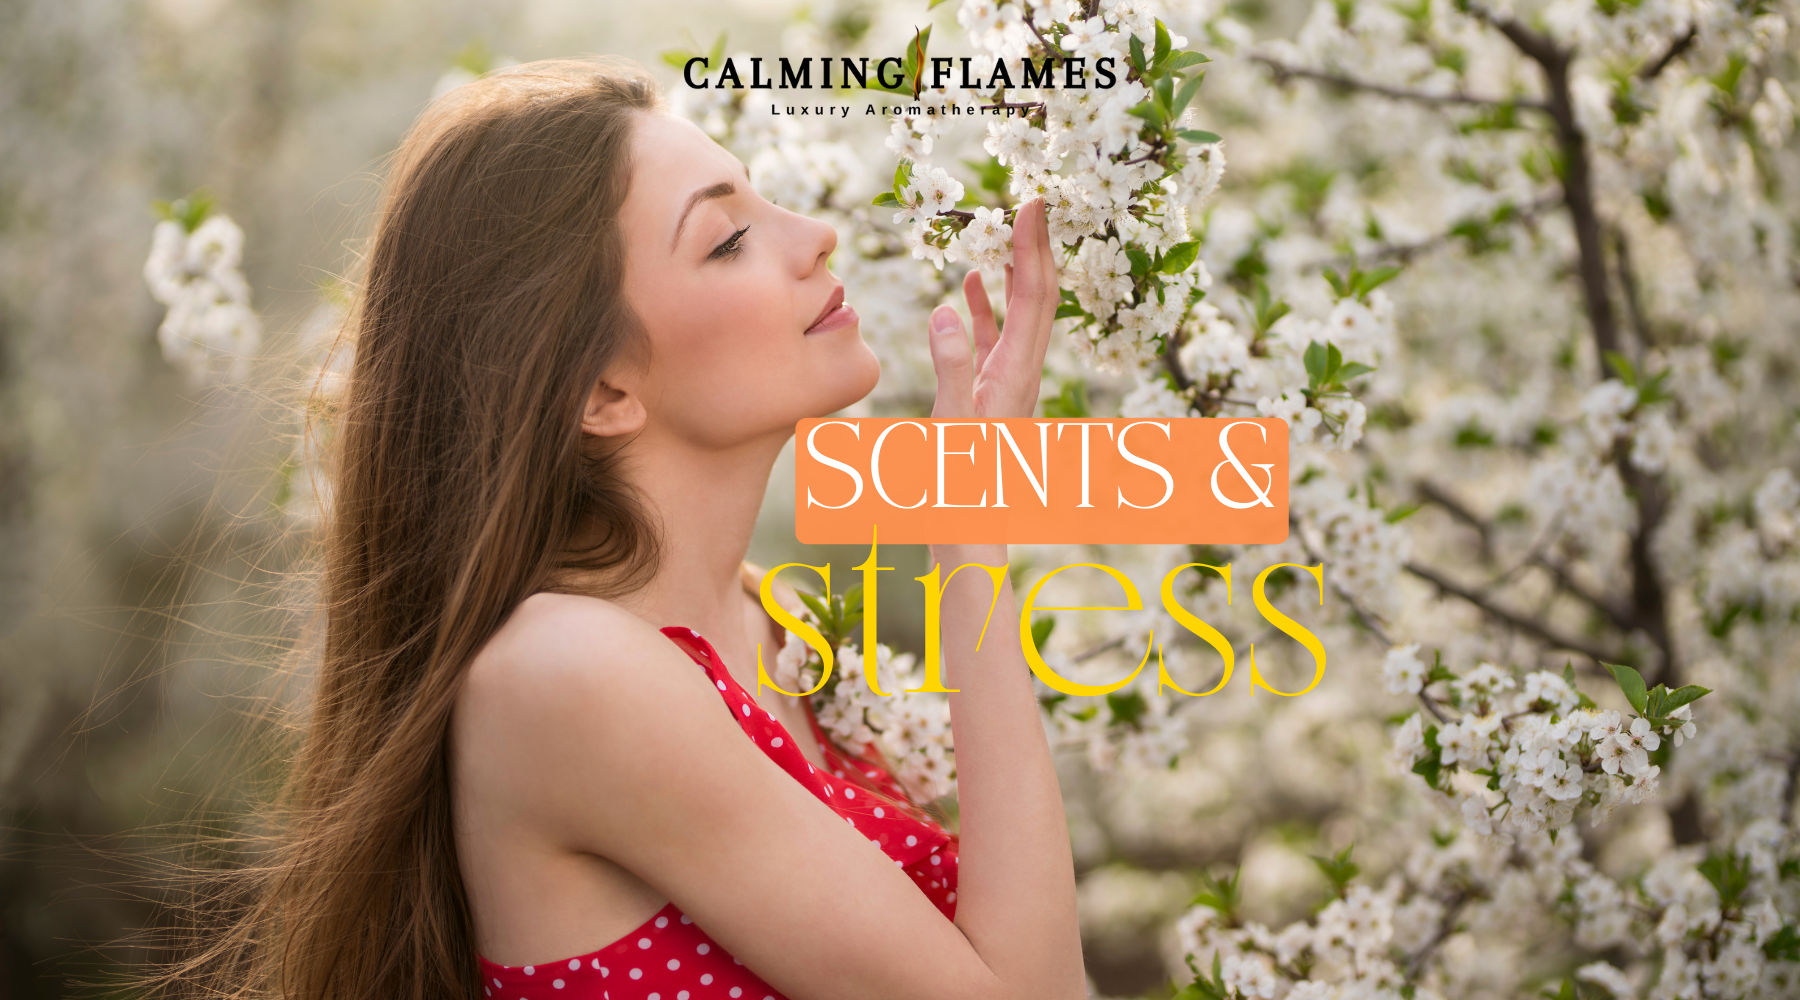 How can the power of scents through aromatherapy help you manage stress?